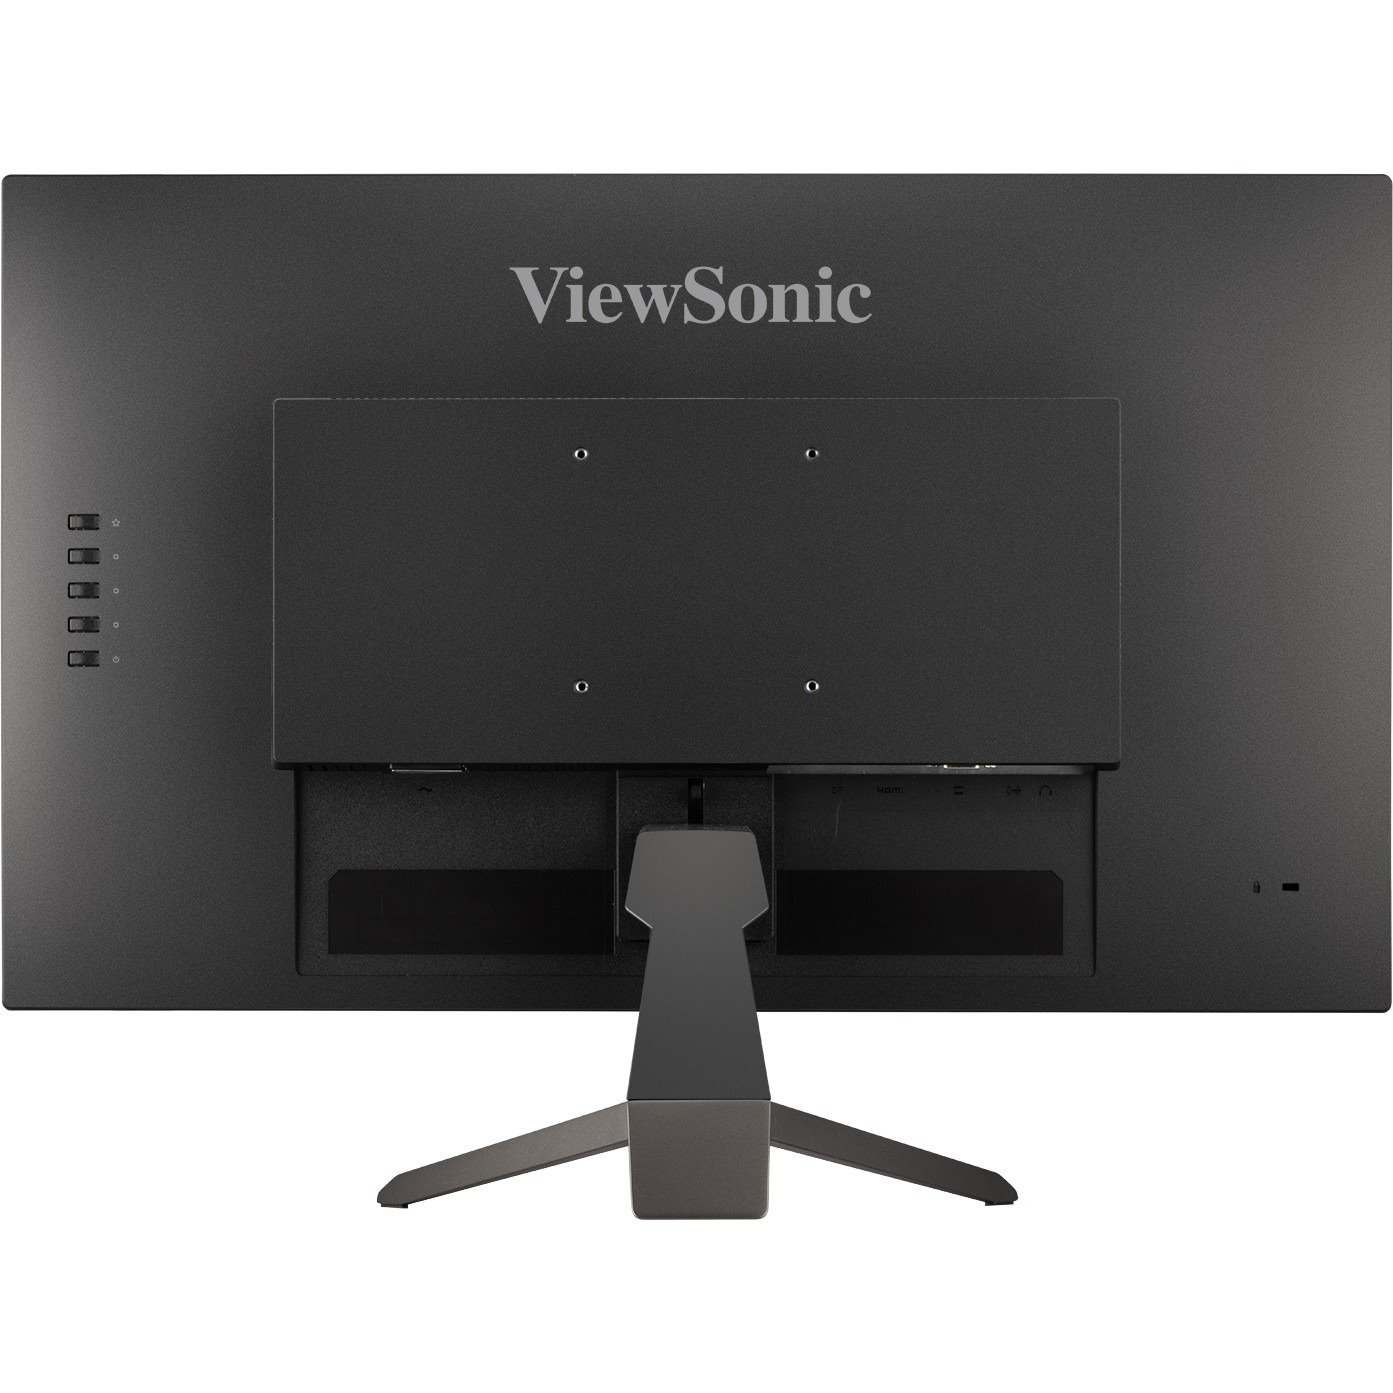 ViewSonic VX2267-MHD 22 Inch 1080p Gaming Monitor with 100Hz, 1ms, Ultra-Thin Bezels, FreeSync, Eye Care, HDMI, VGA, and DP